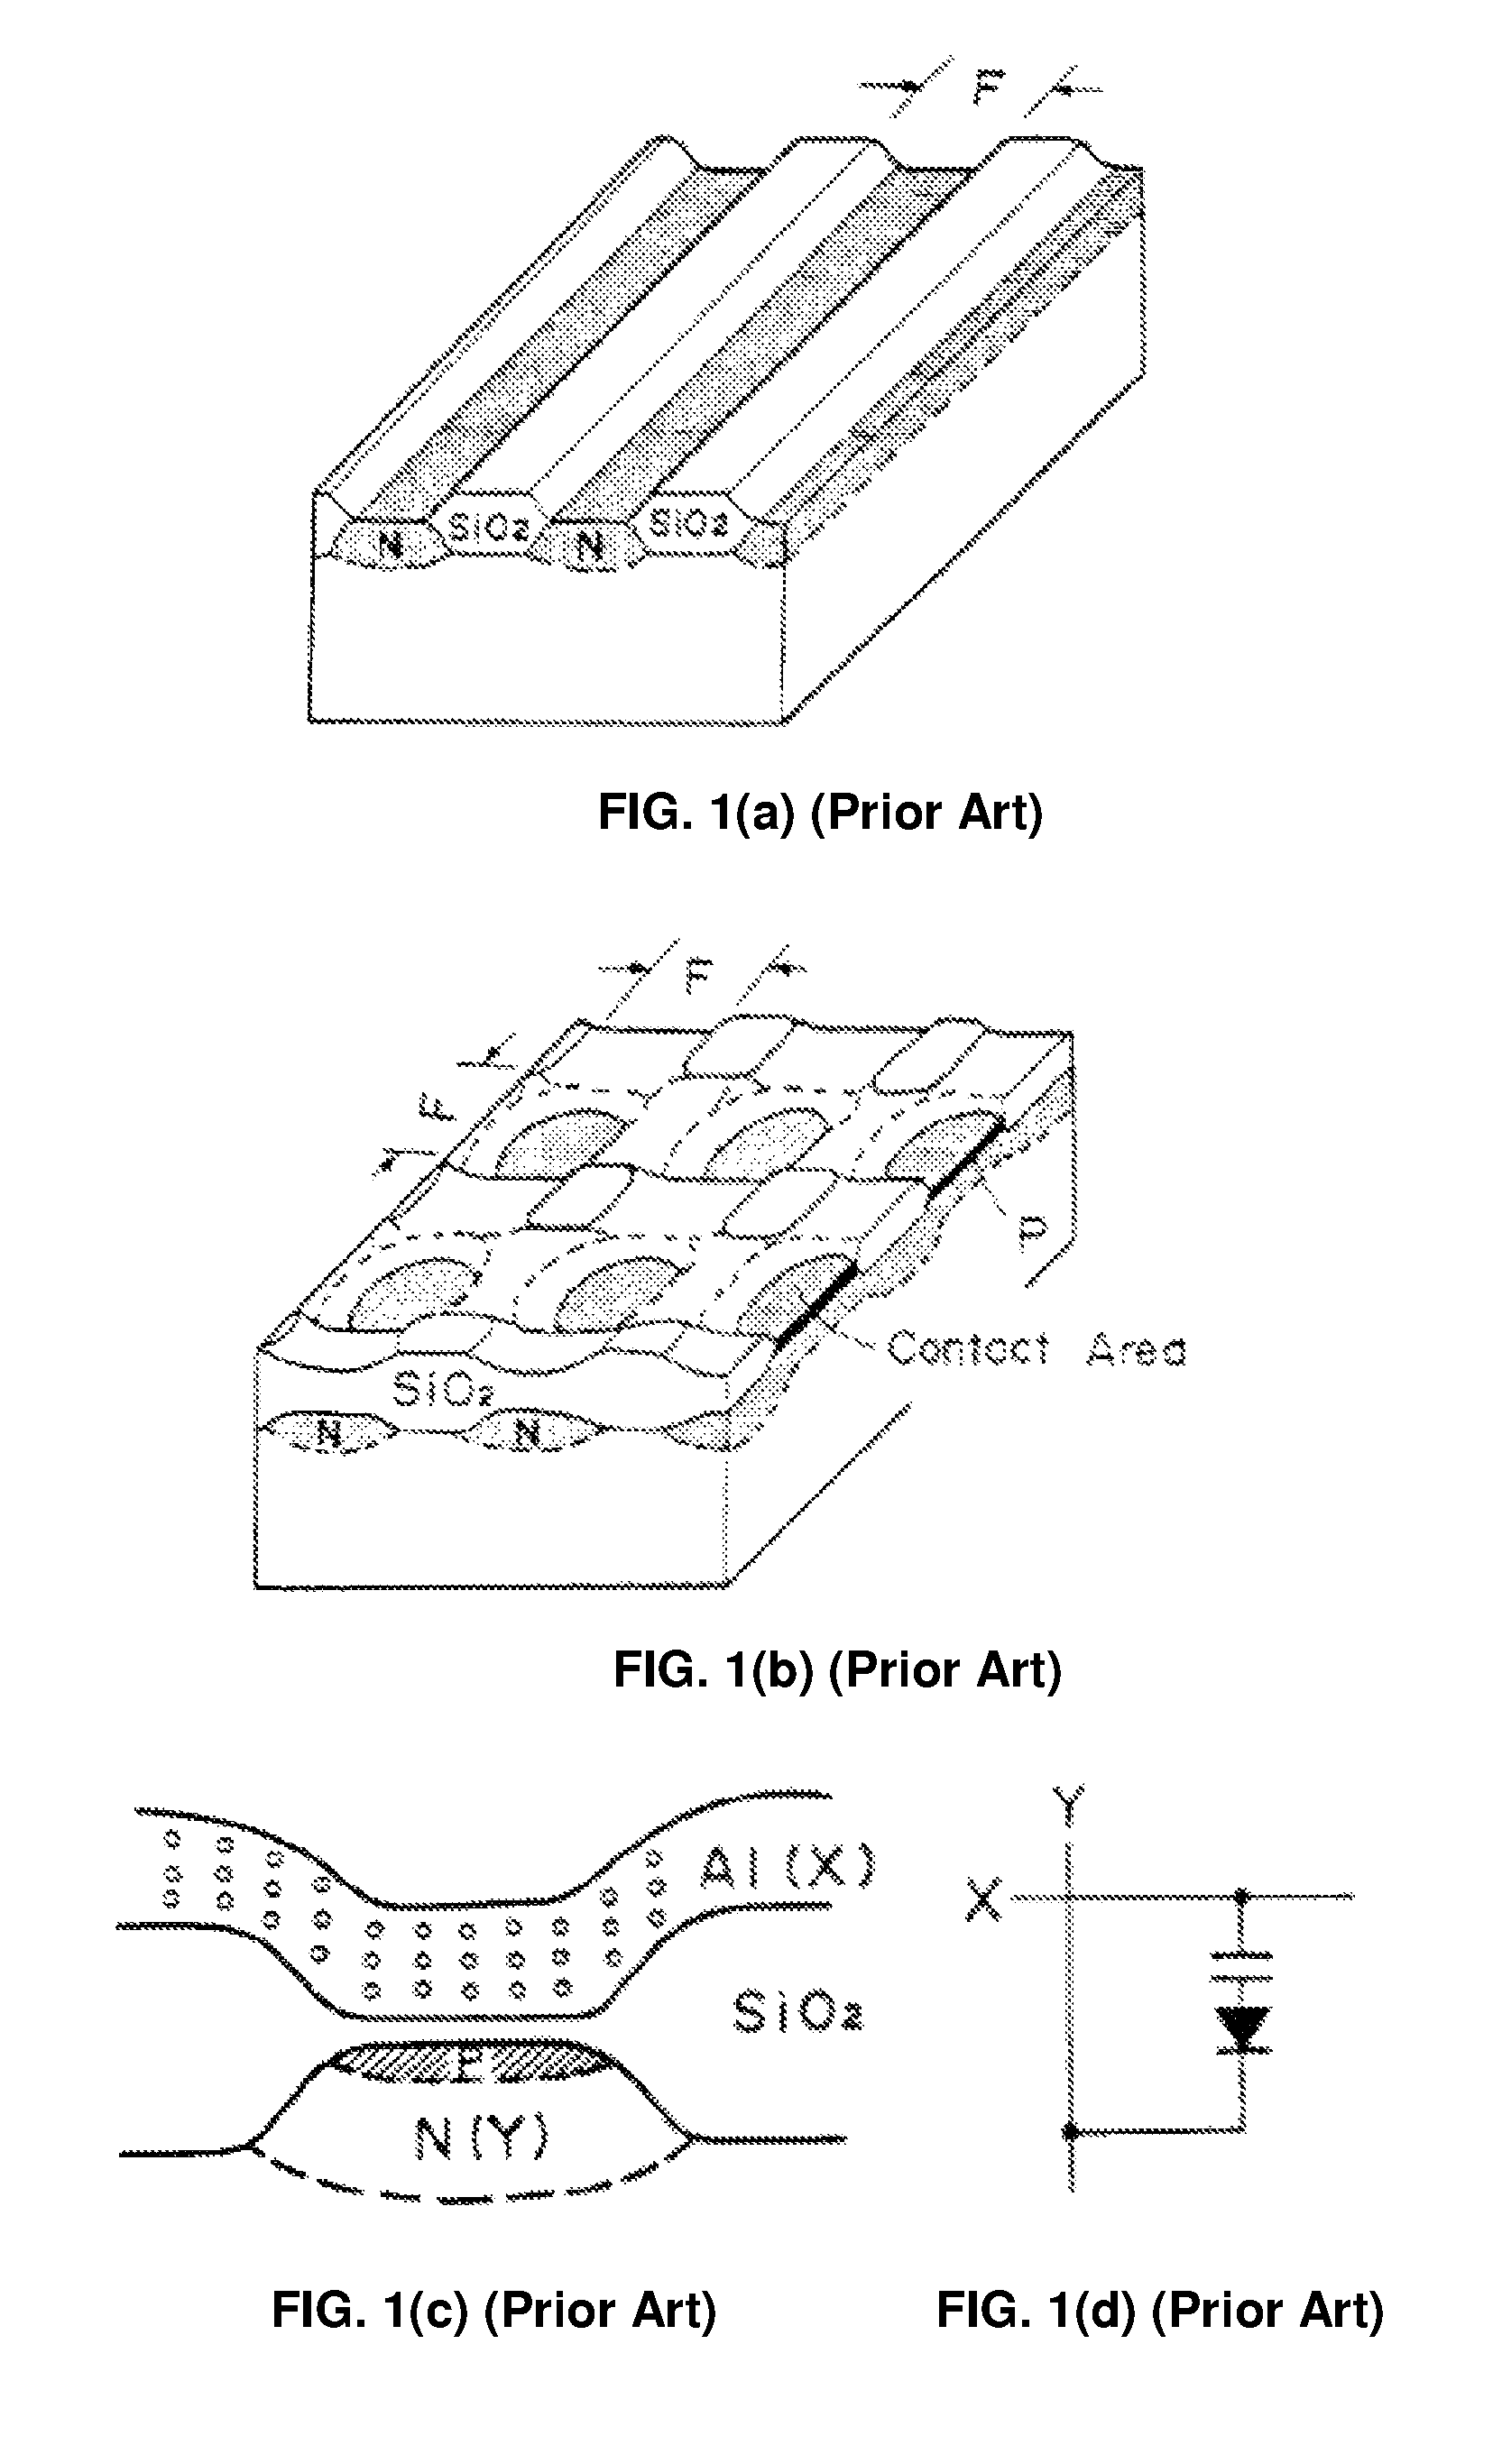 Circuit and system of a high density anti-fuse